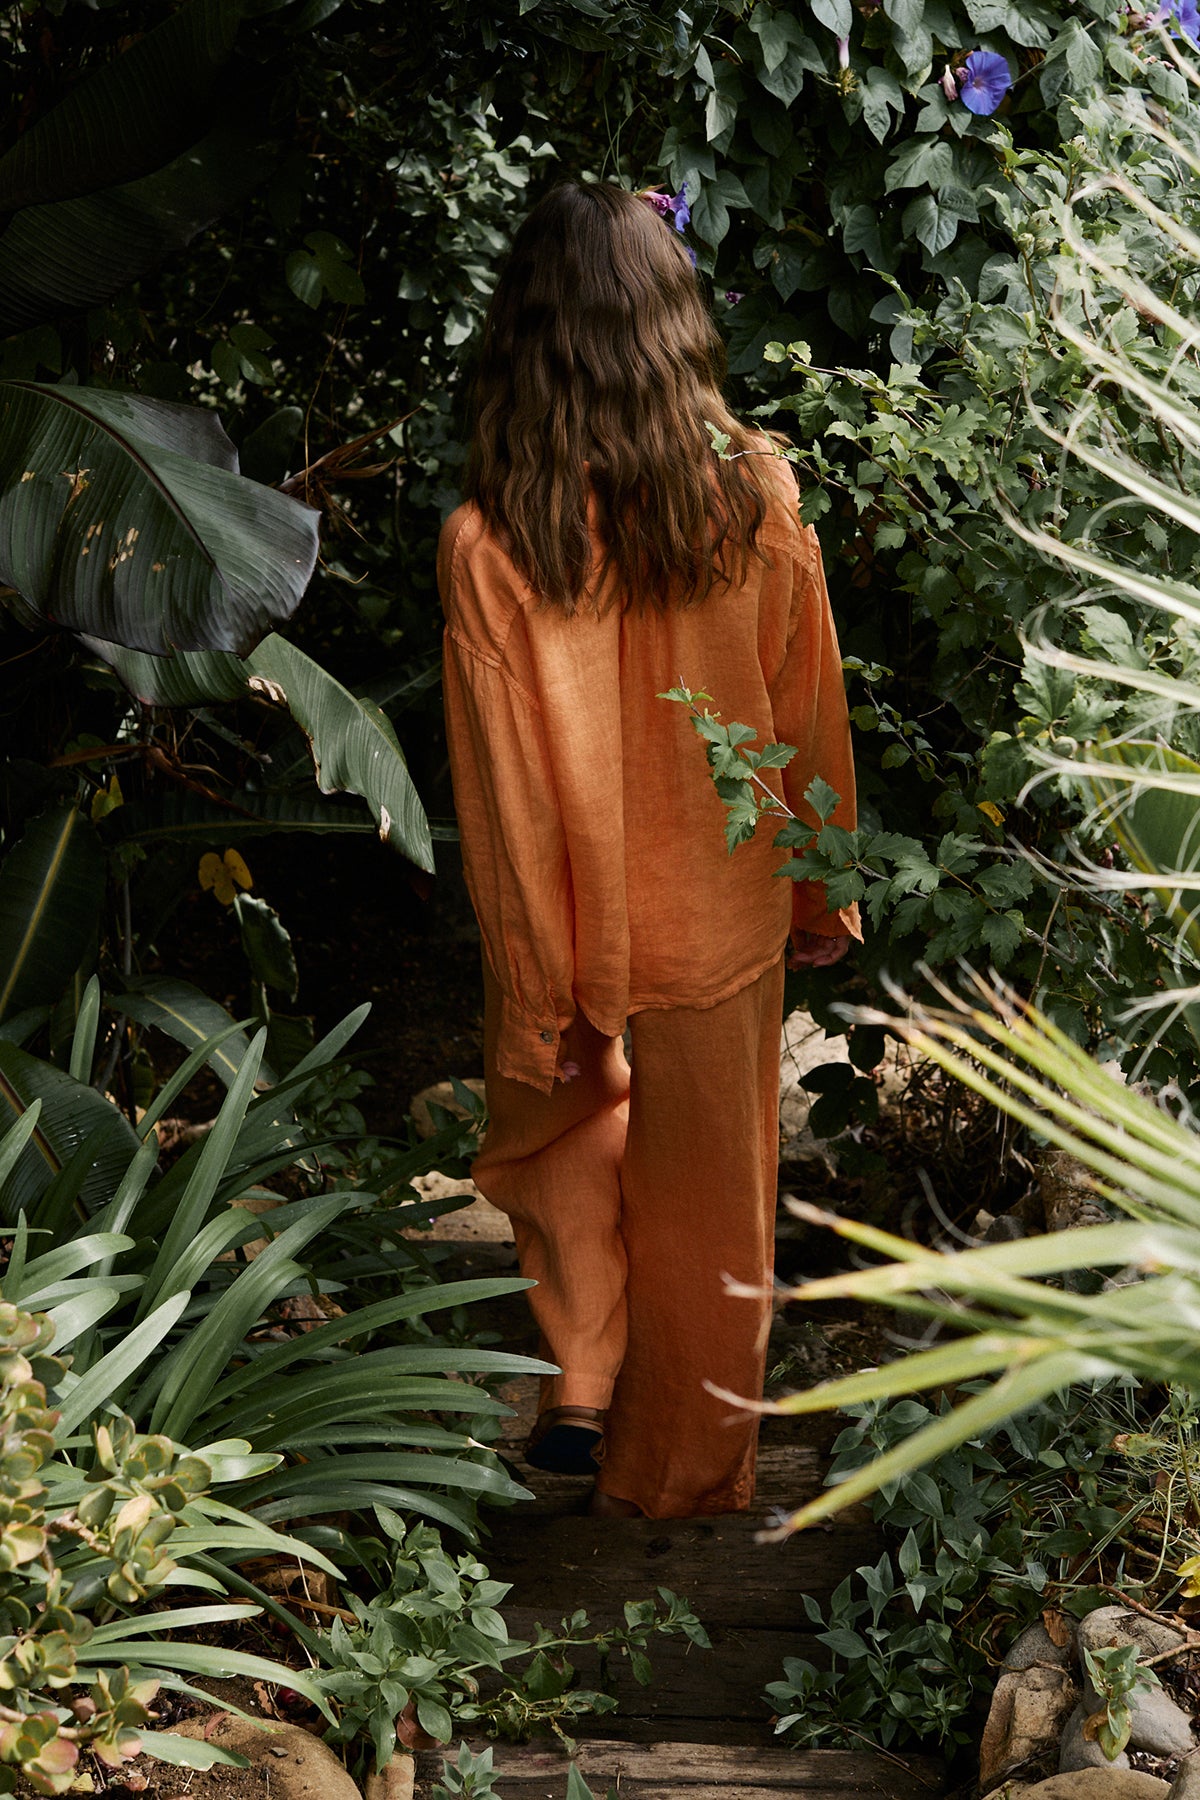   Women walking down wooden steps outdoors surrounded by trees wearing Eden shirt in orange heat with Lola pant, necklaces and sandals full length back 